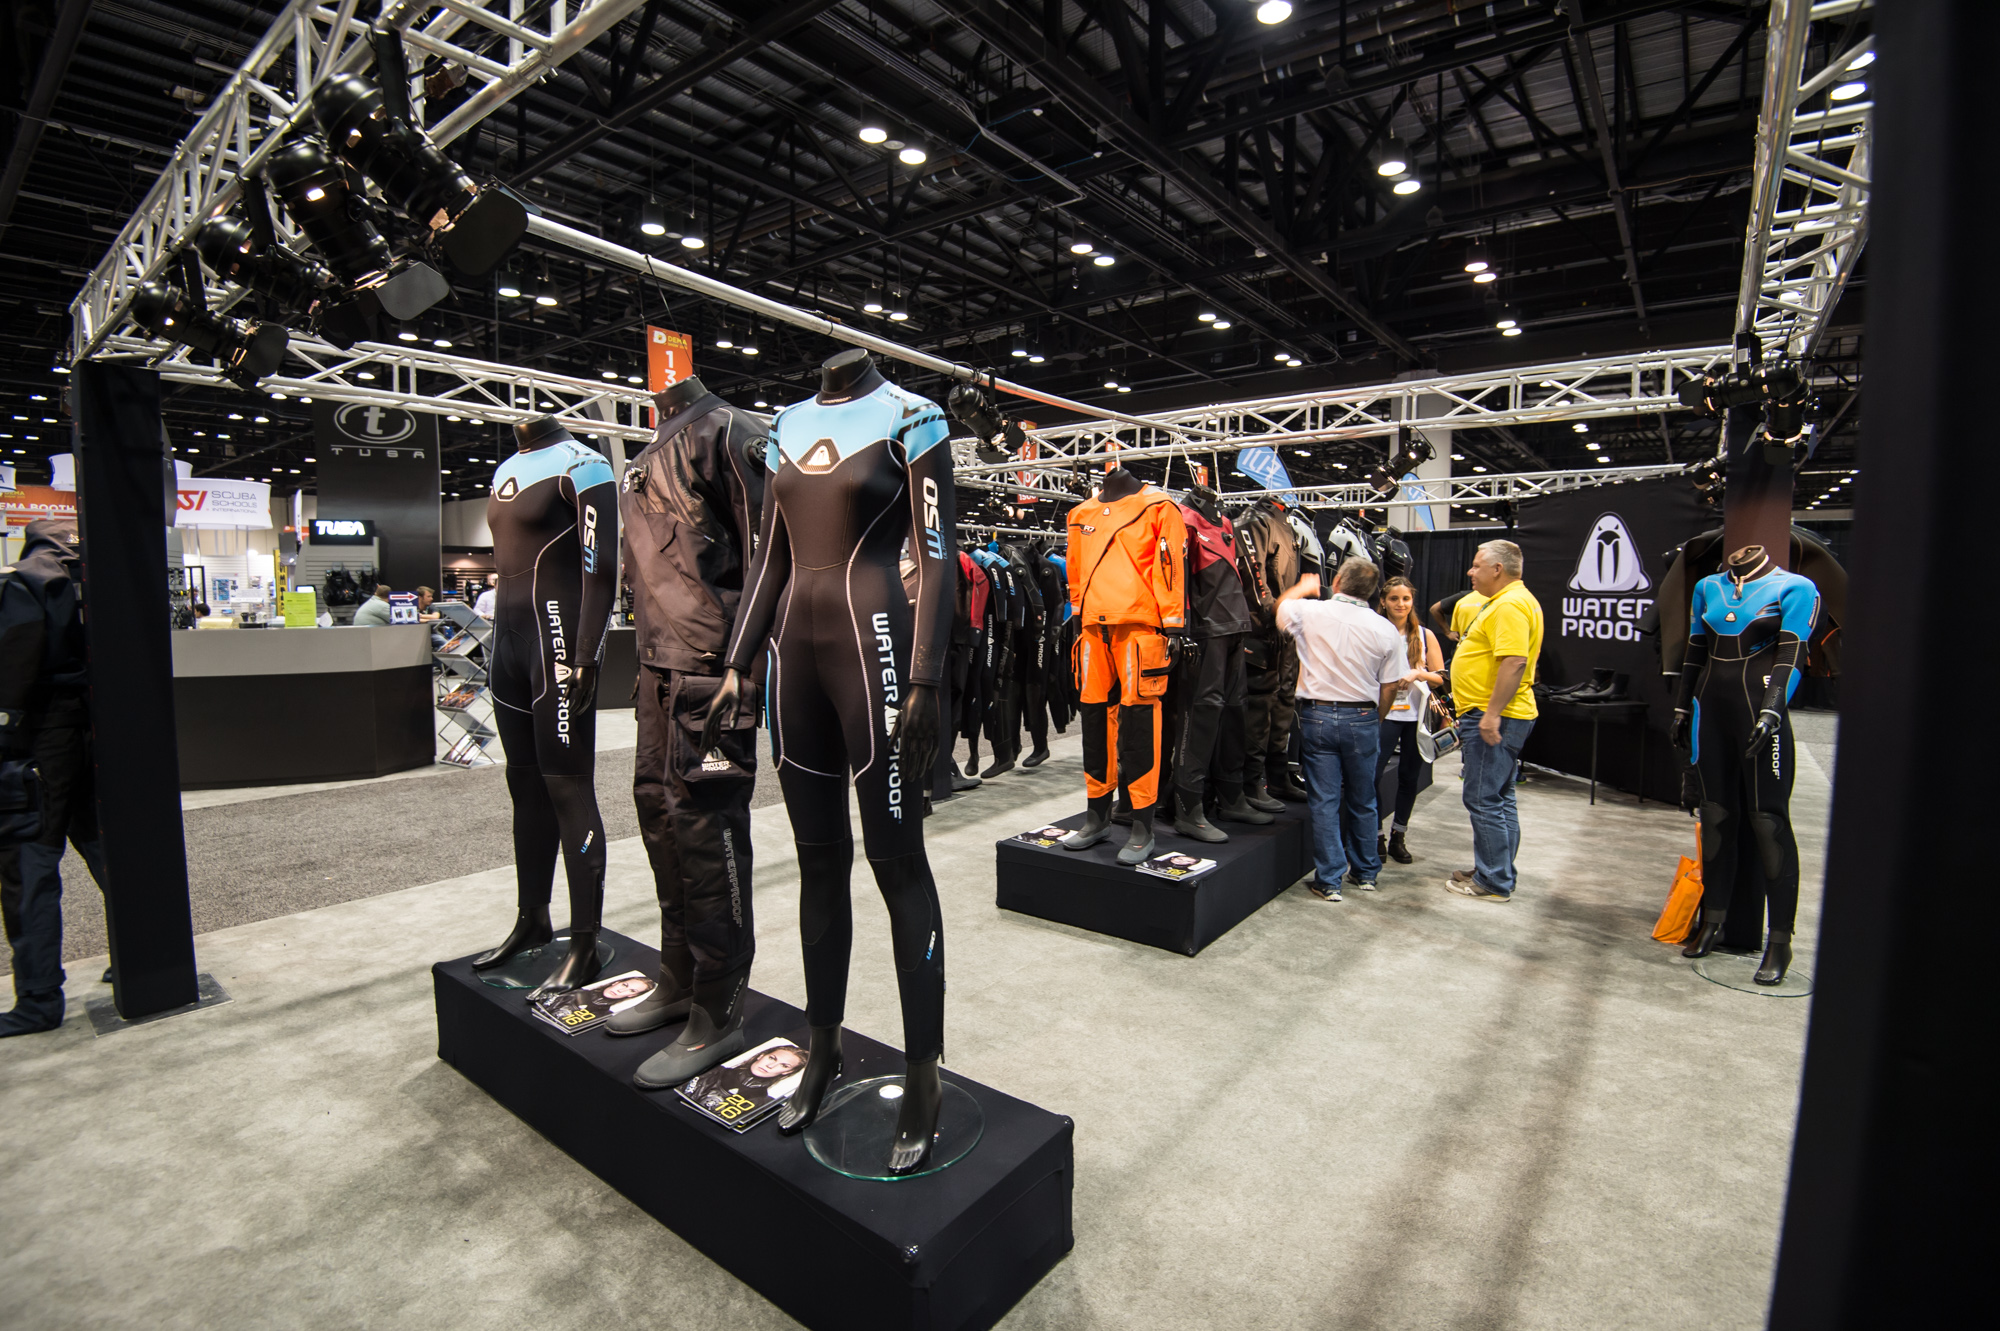  Waterproof showed off a wide variety of drysuits and wetsuits 